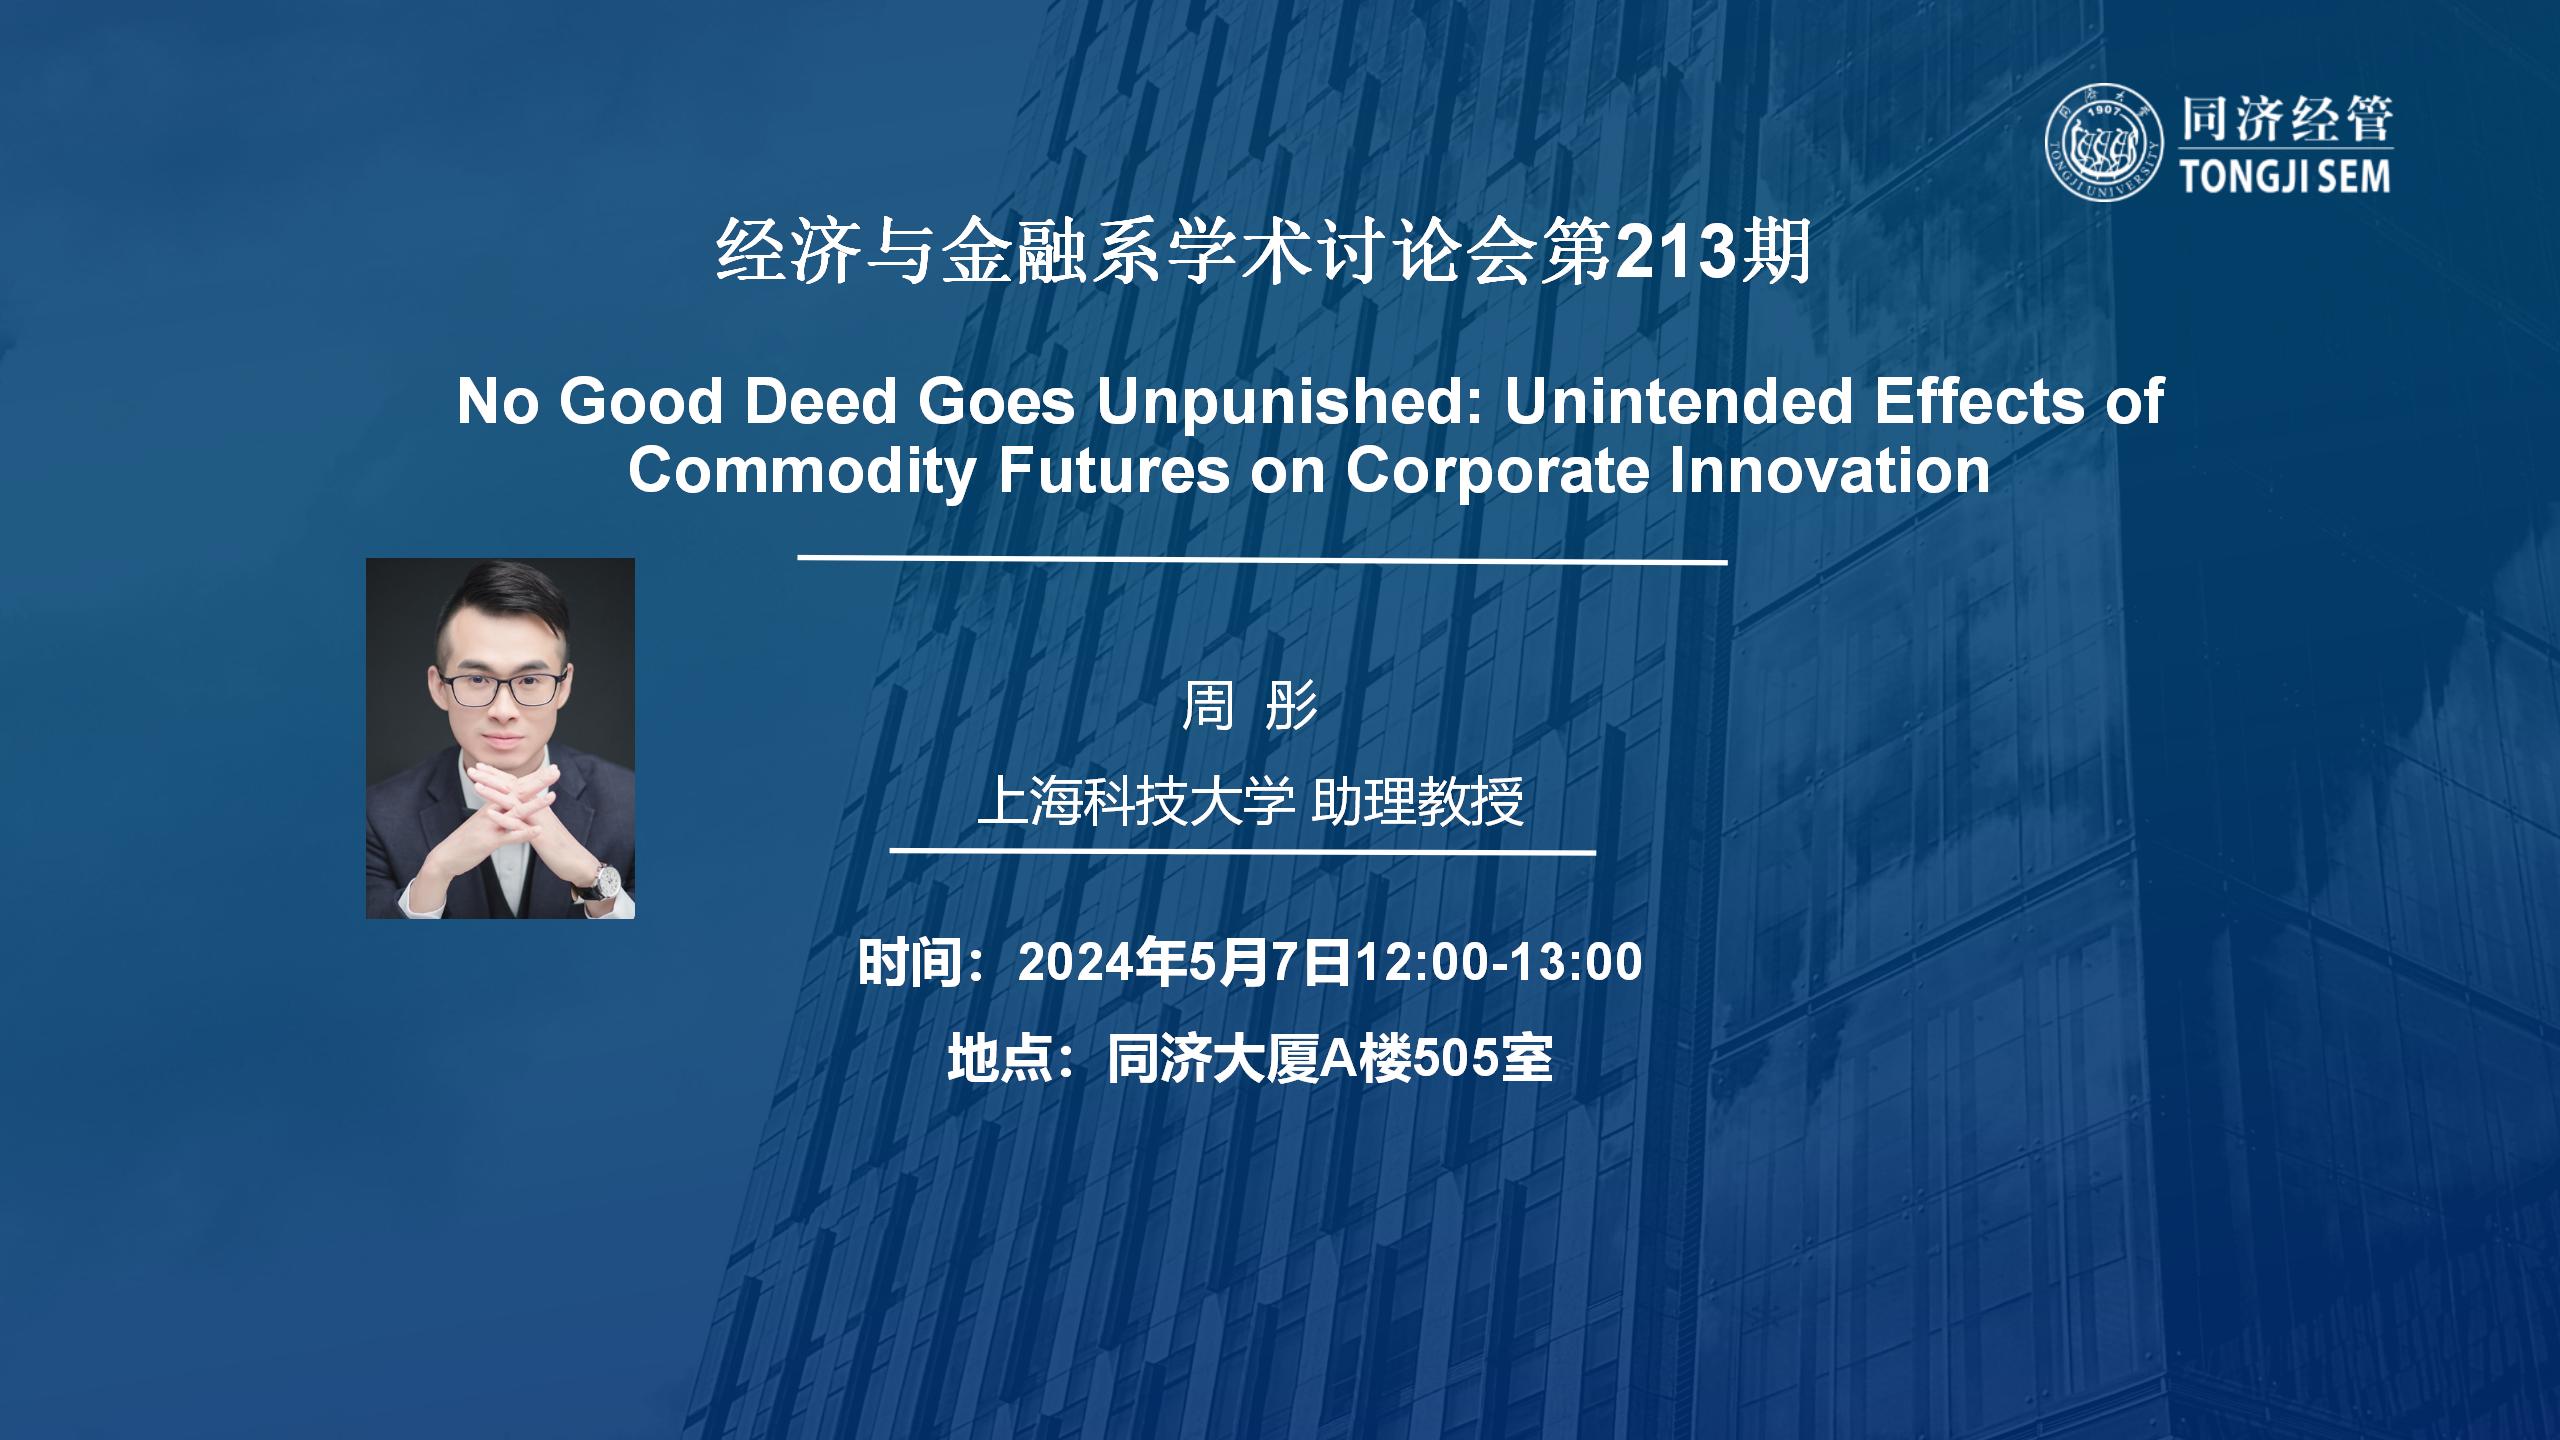 No Good Deed Goes Unpunished: Unintended Effects of Commodity Futures on Corporate Innovation